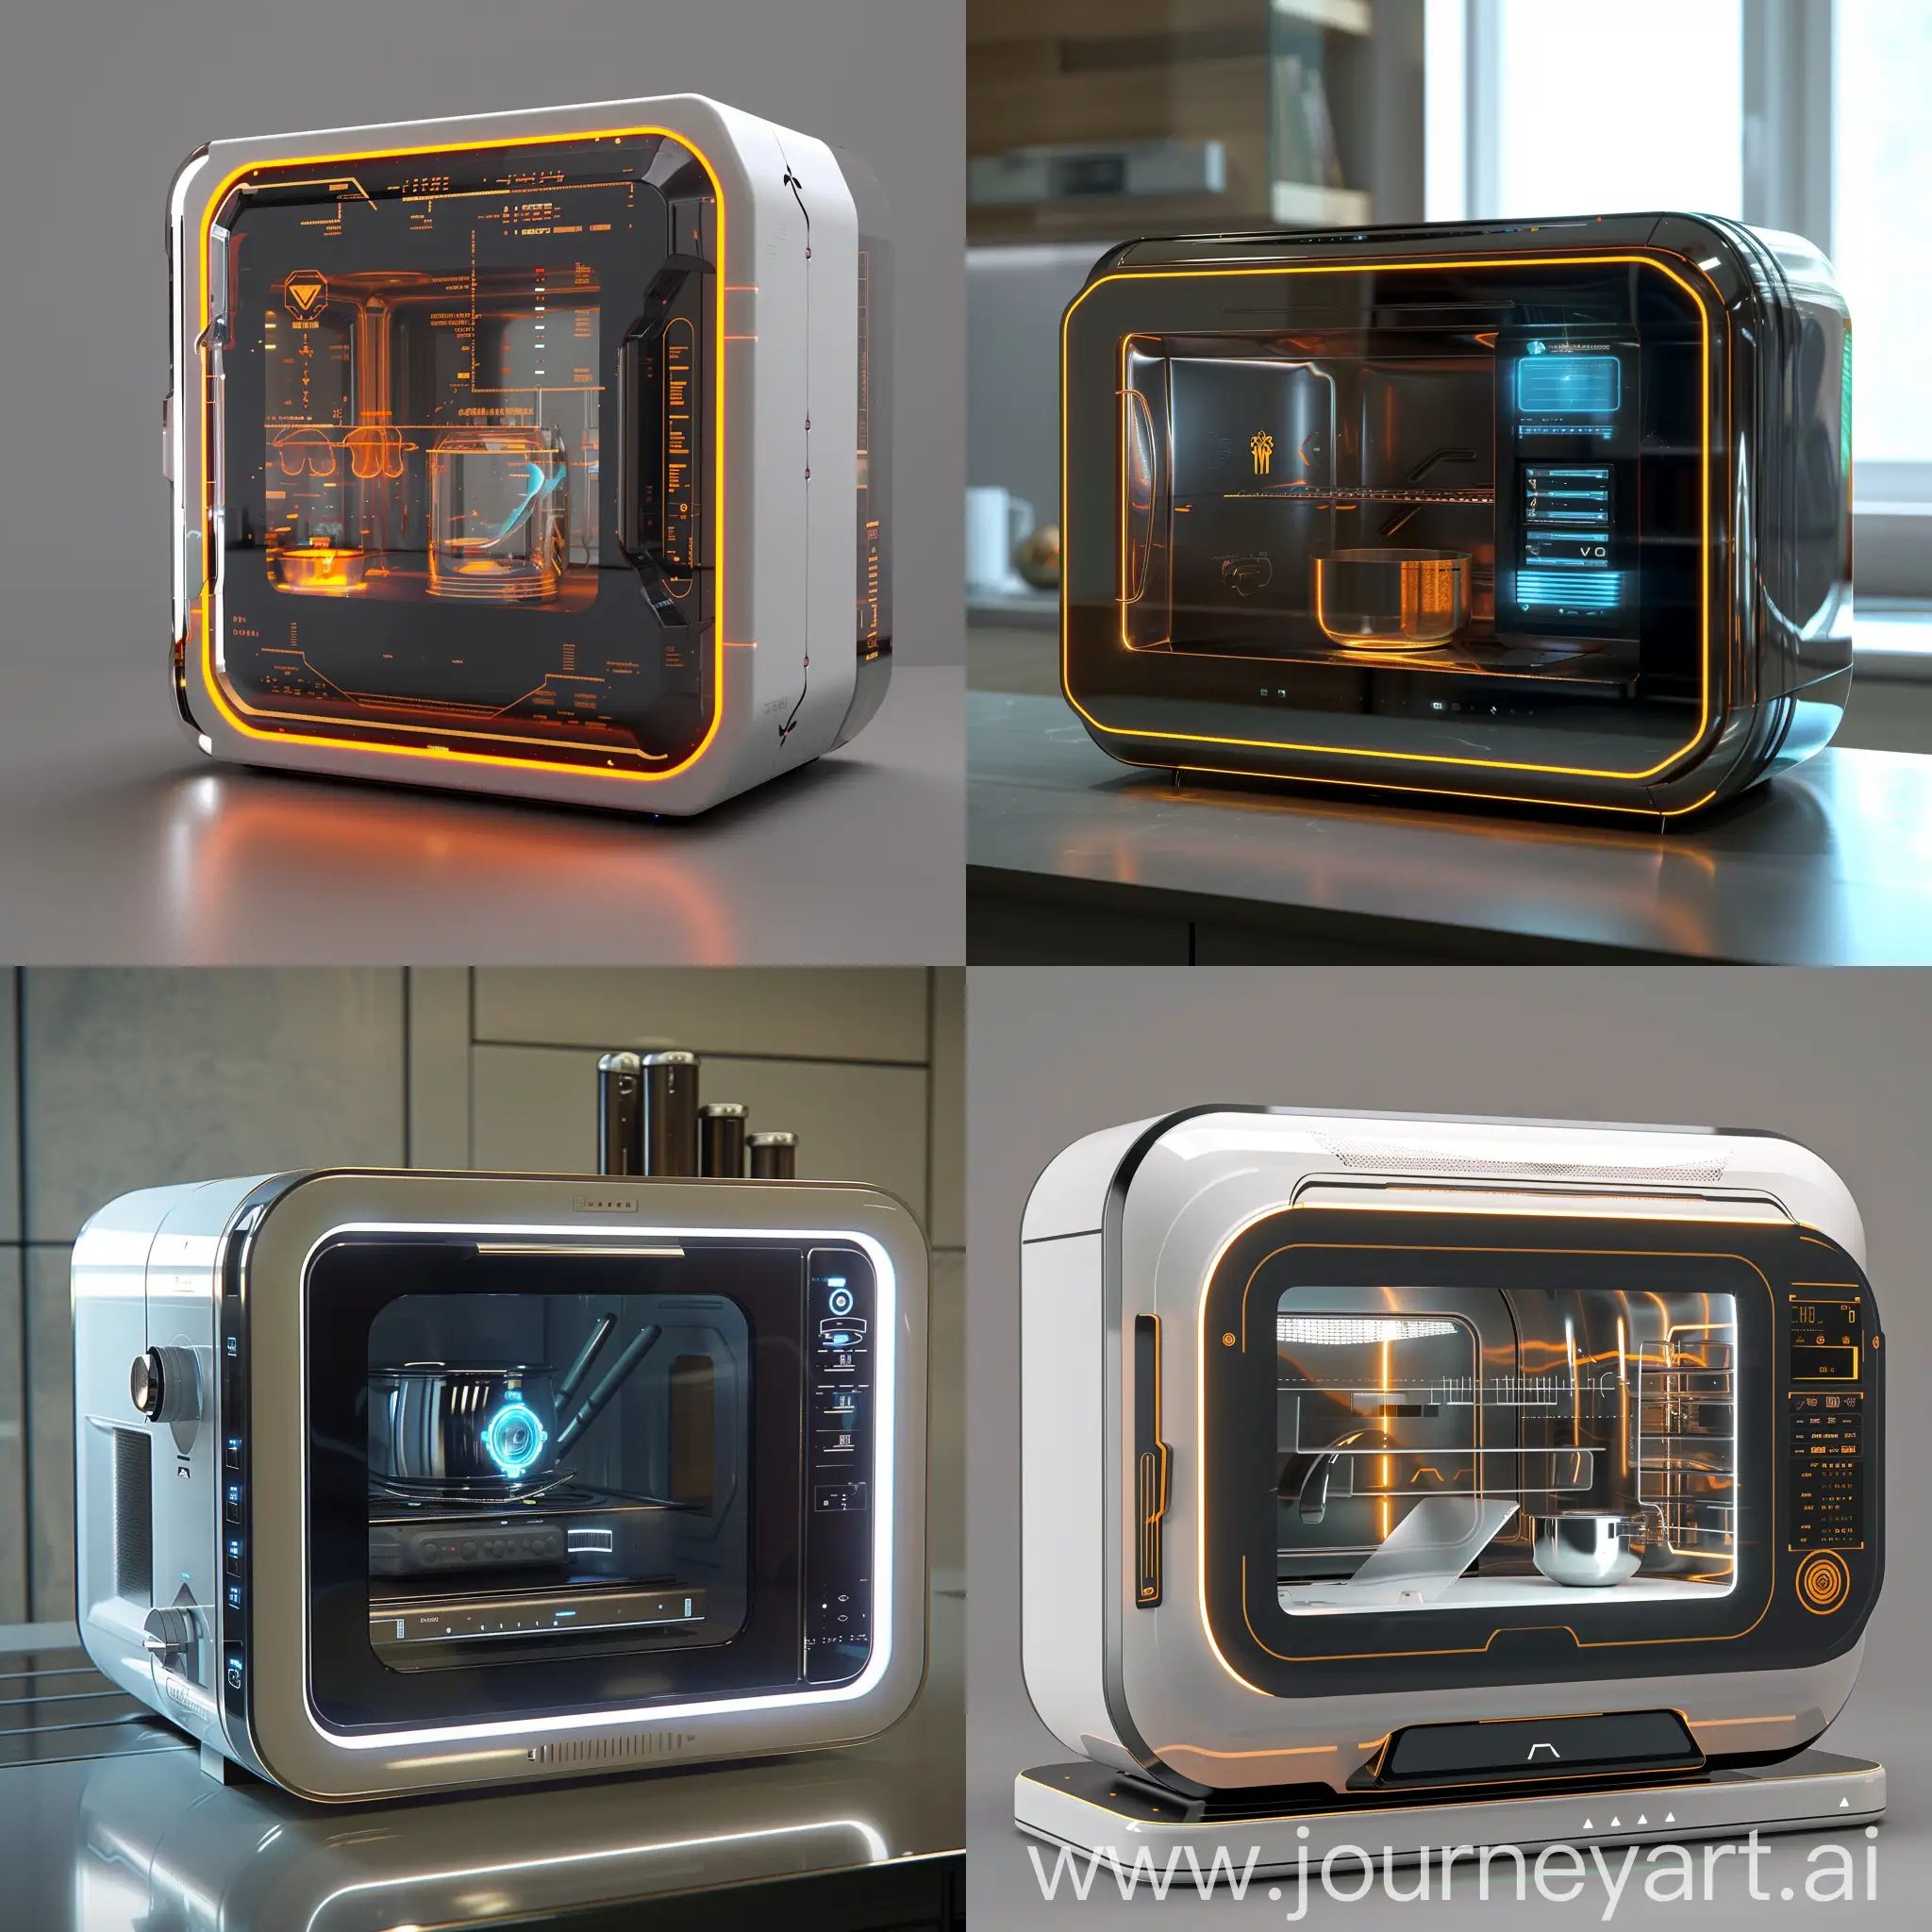 Futuristic-SciFi-Microwave-with-Quantum-Heating-and-AI-Cooking-Assistant